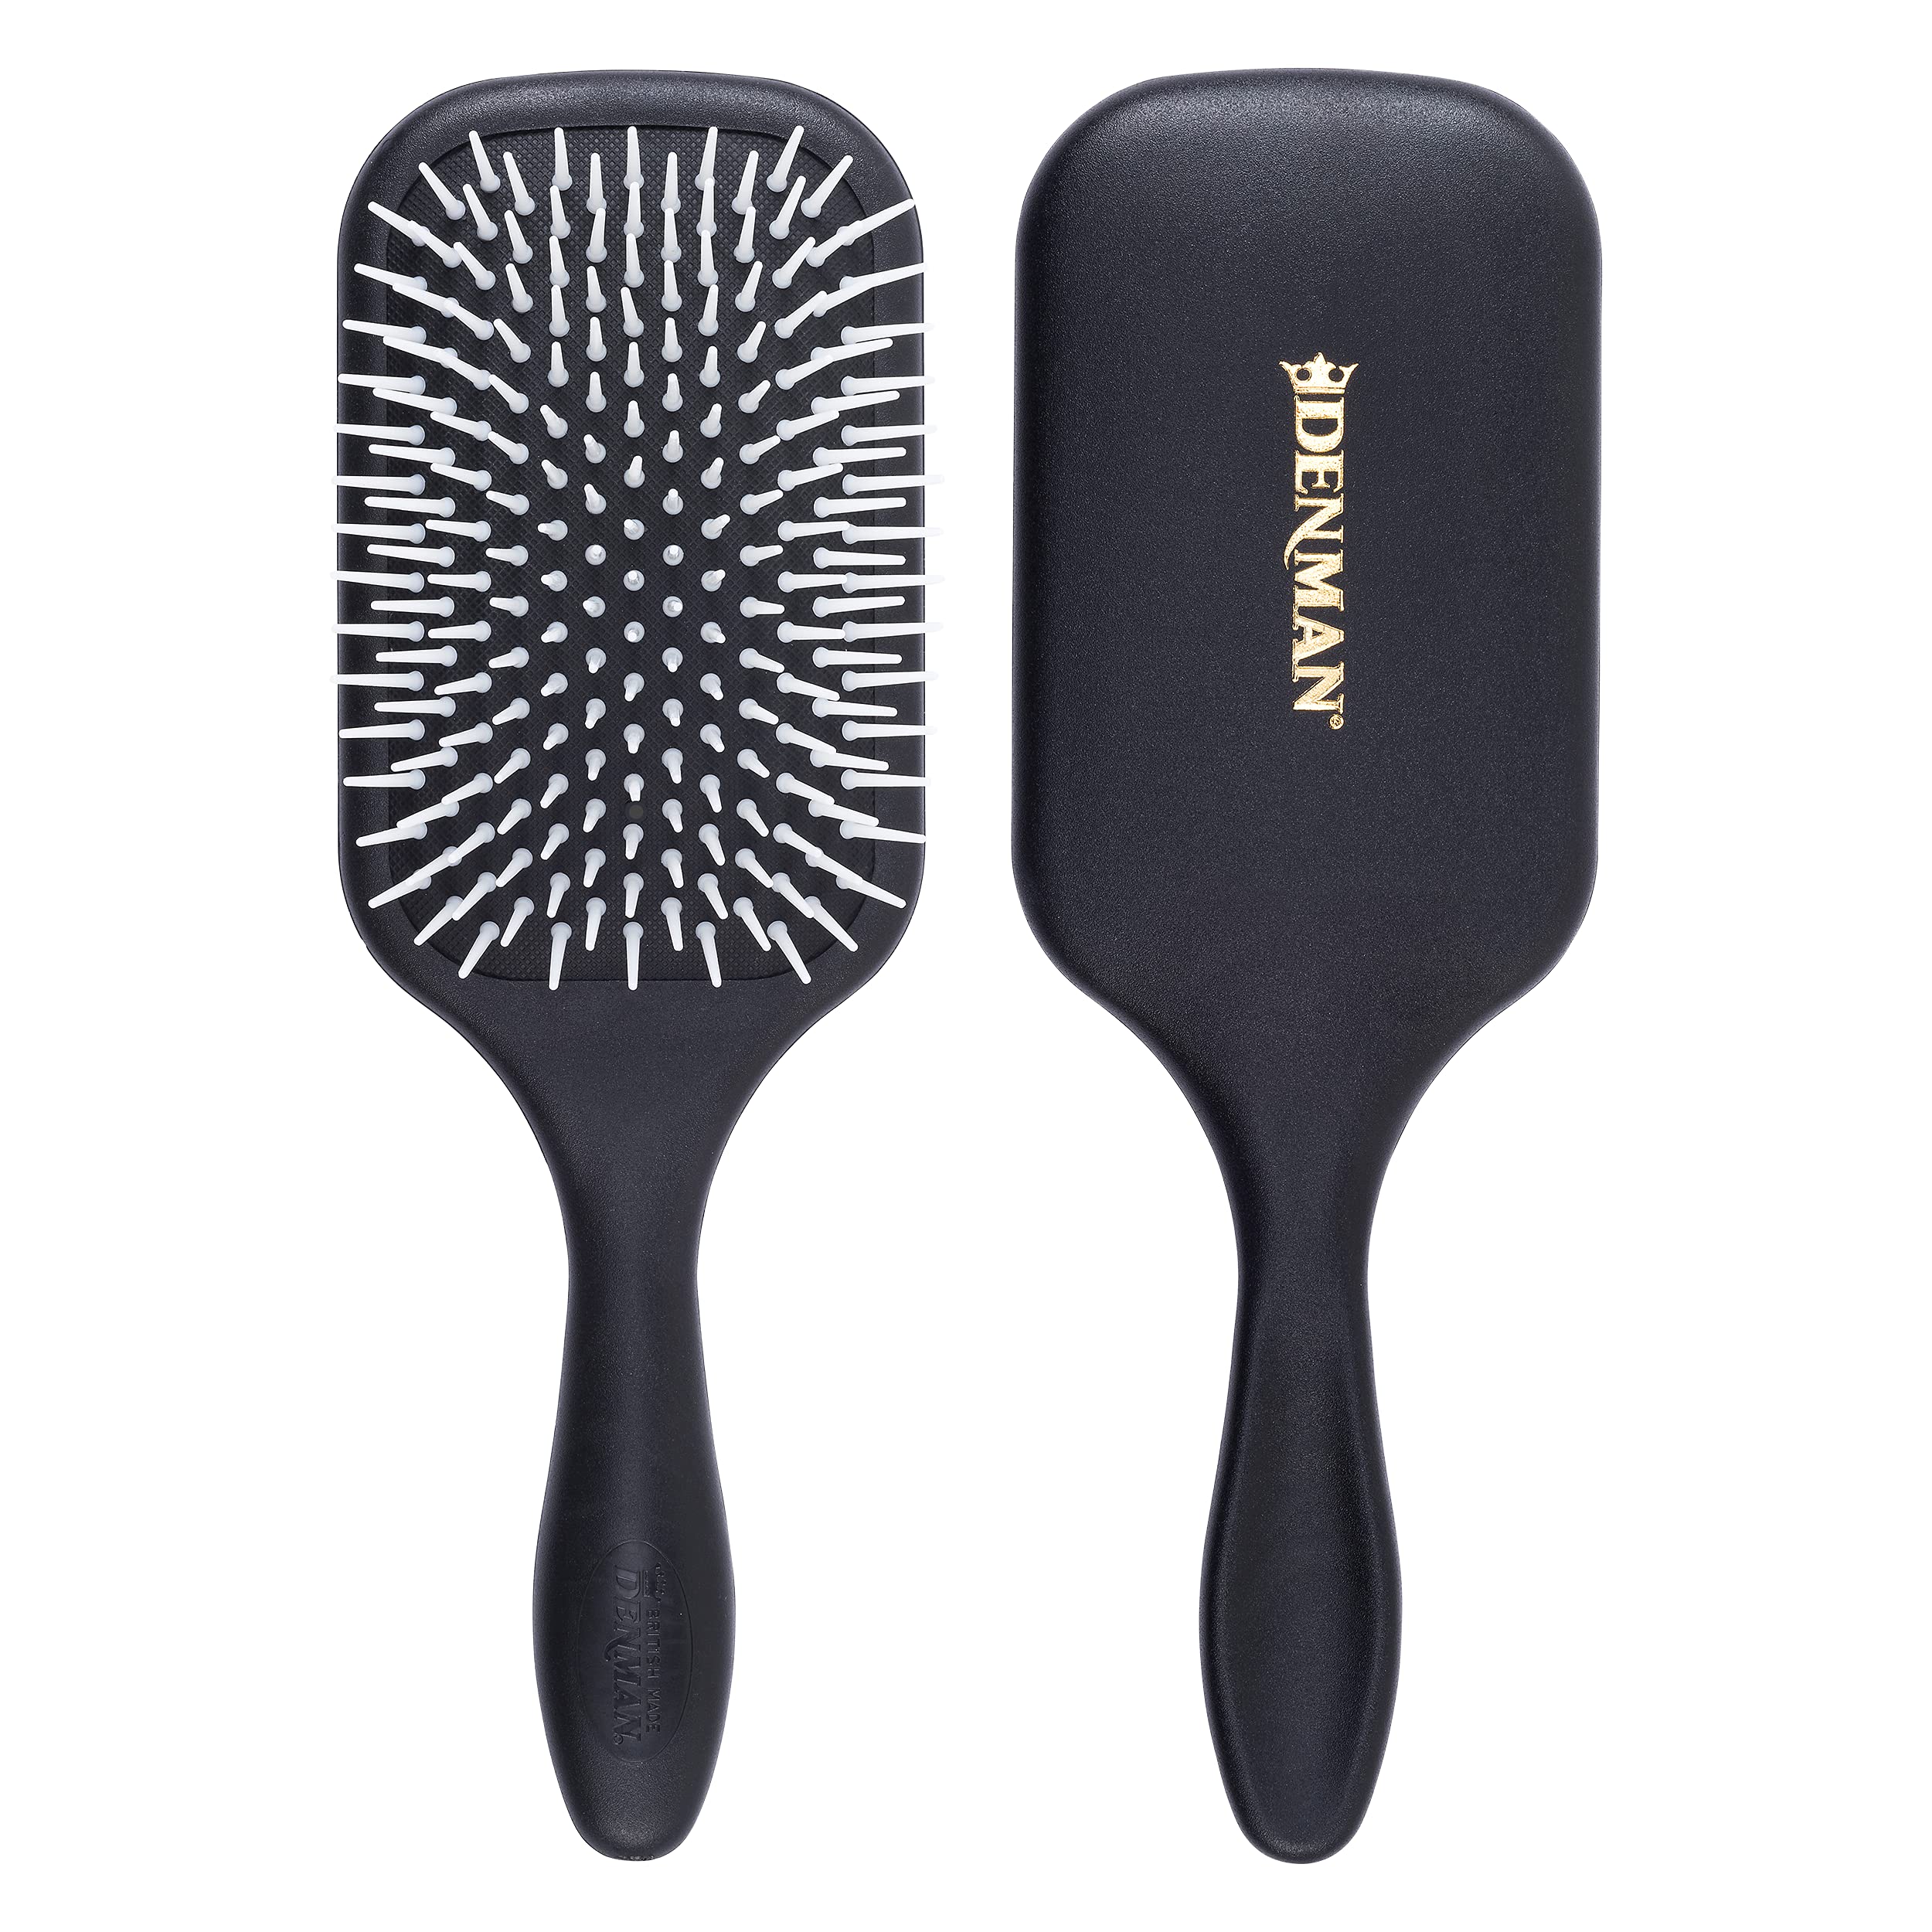 Denman Detangler Hair Brush for Fast and Comfortable Detangling, Blow Drying and Styling - Combination of D3 Styling Pins & Paddle Brush - For Women and Men (Black, White Pad), D38